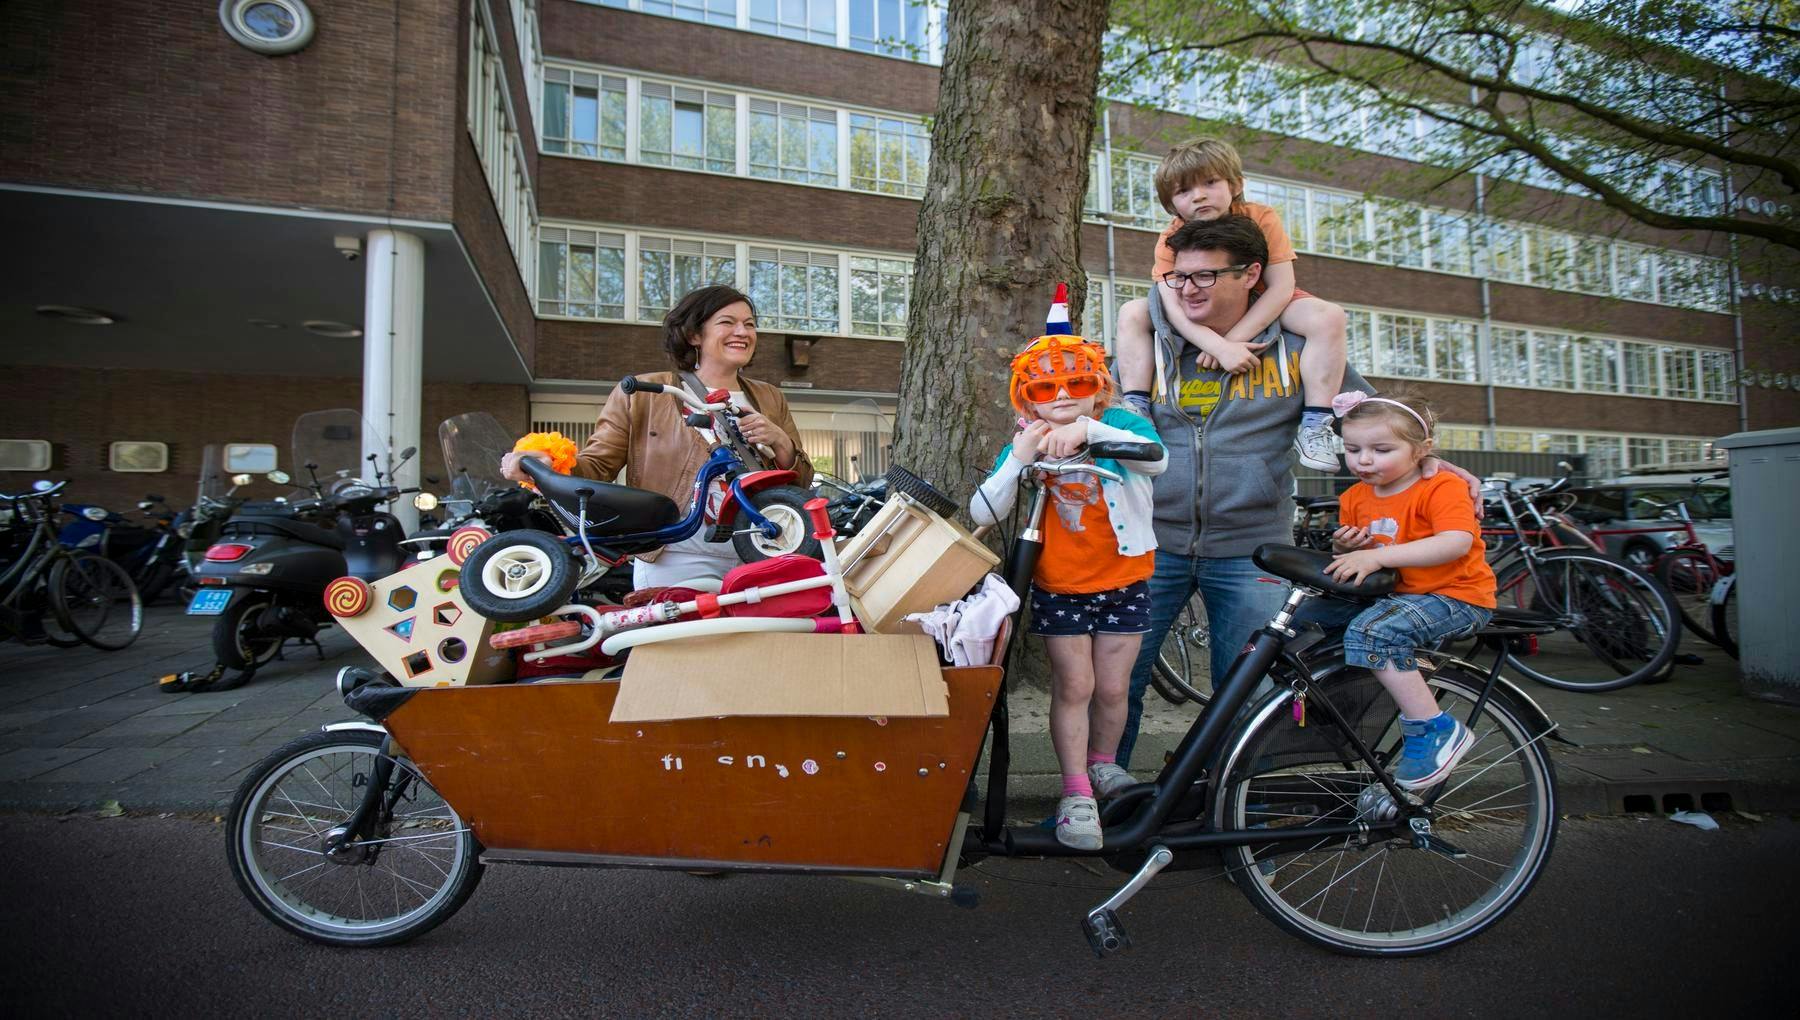 Koningsdag or King's Day is a national holiday in the Kingdom of the Netherlands. Celebrated on 27 April, the date marks the birth of King Willem-Alexander. 

Celebrations: Kings day family with a cargo bike wearing orange costumes, flea markets.